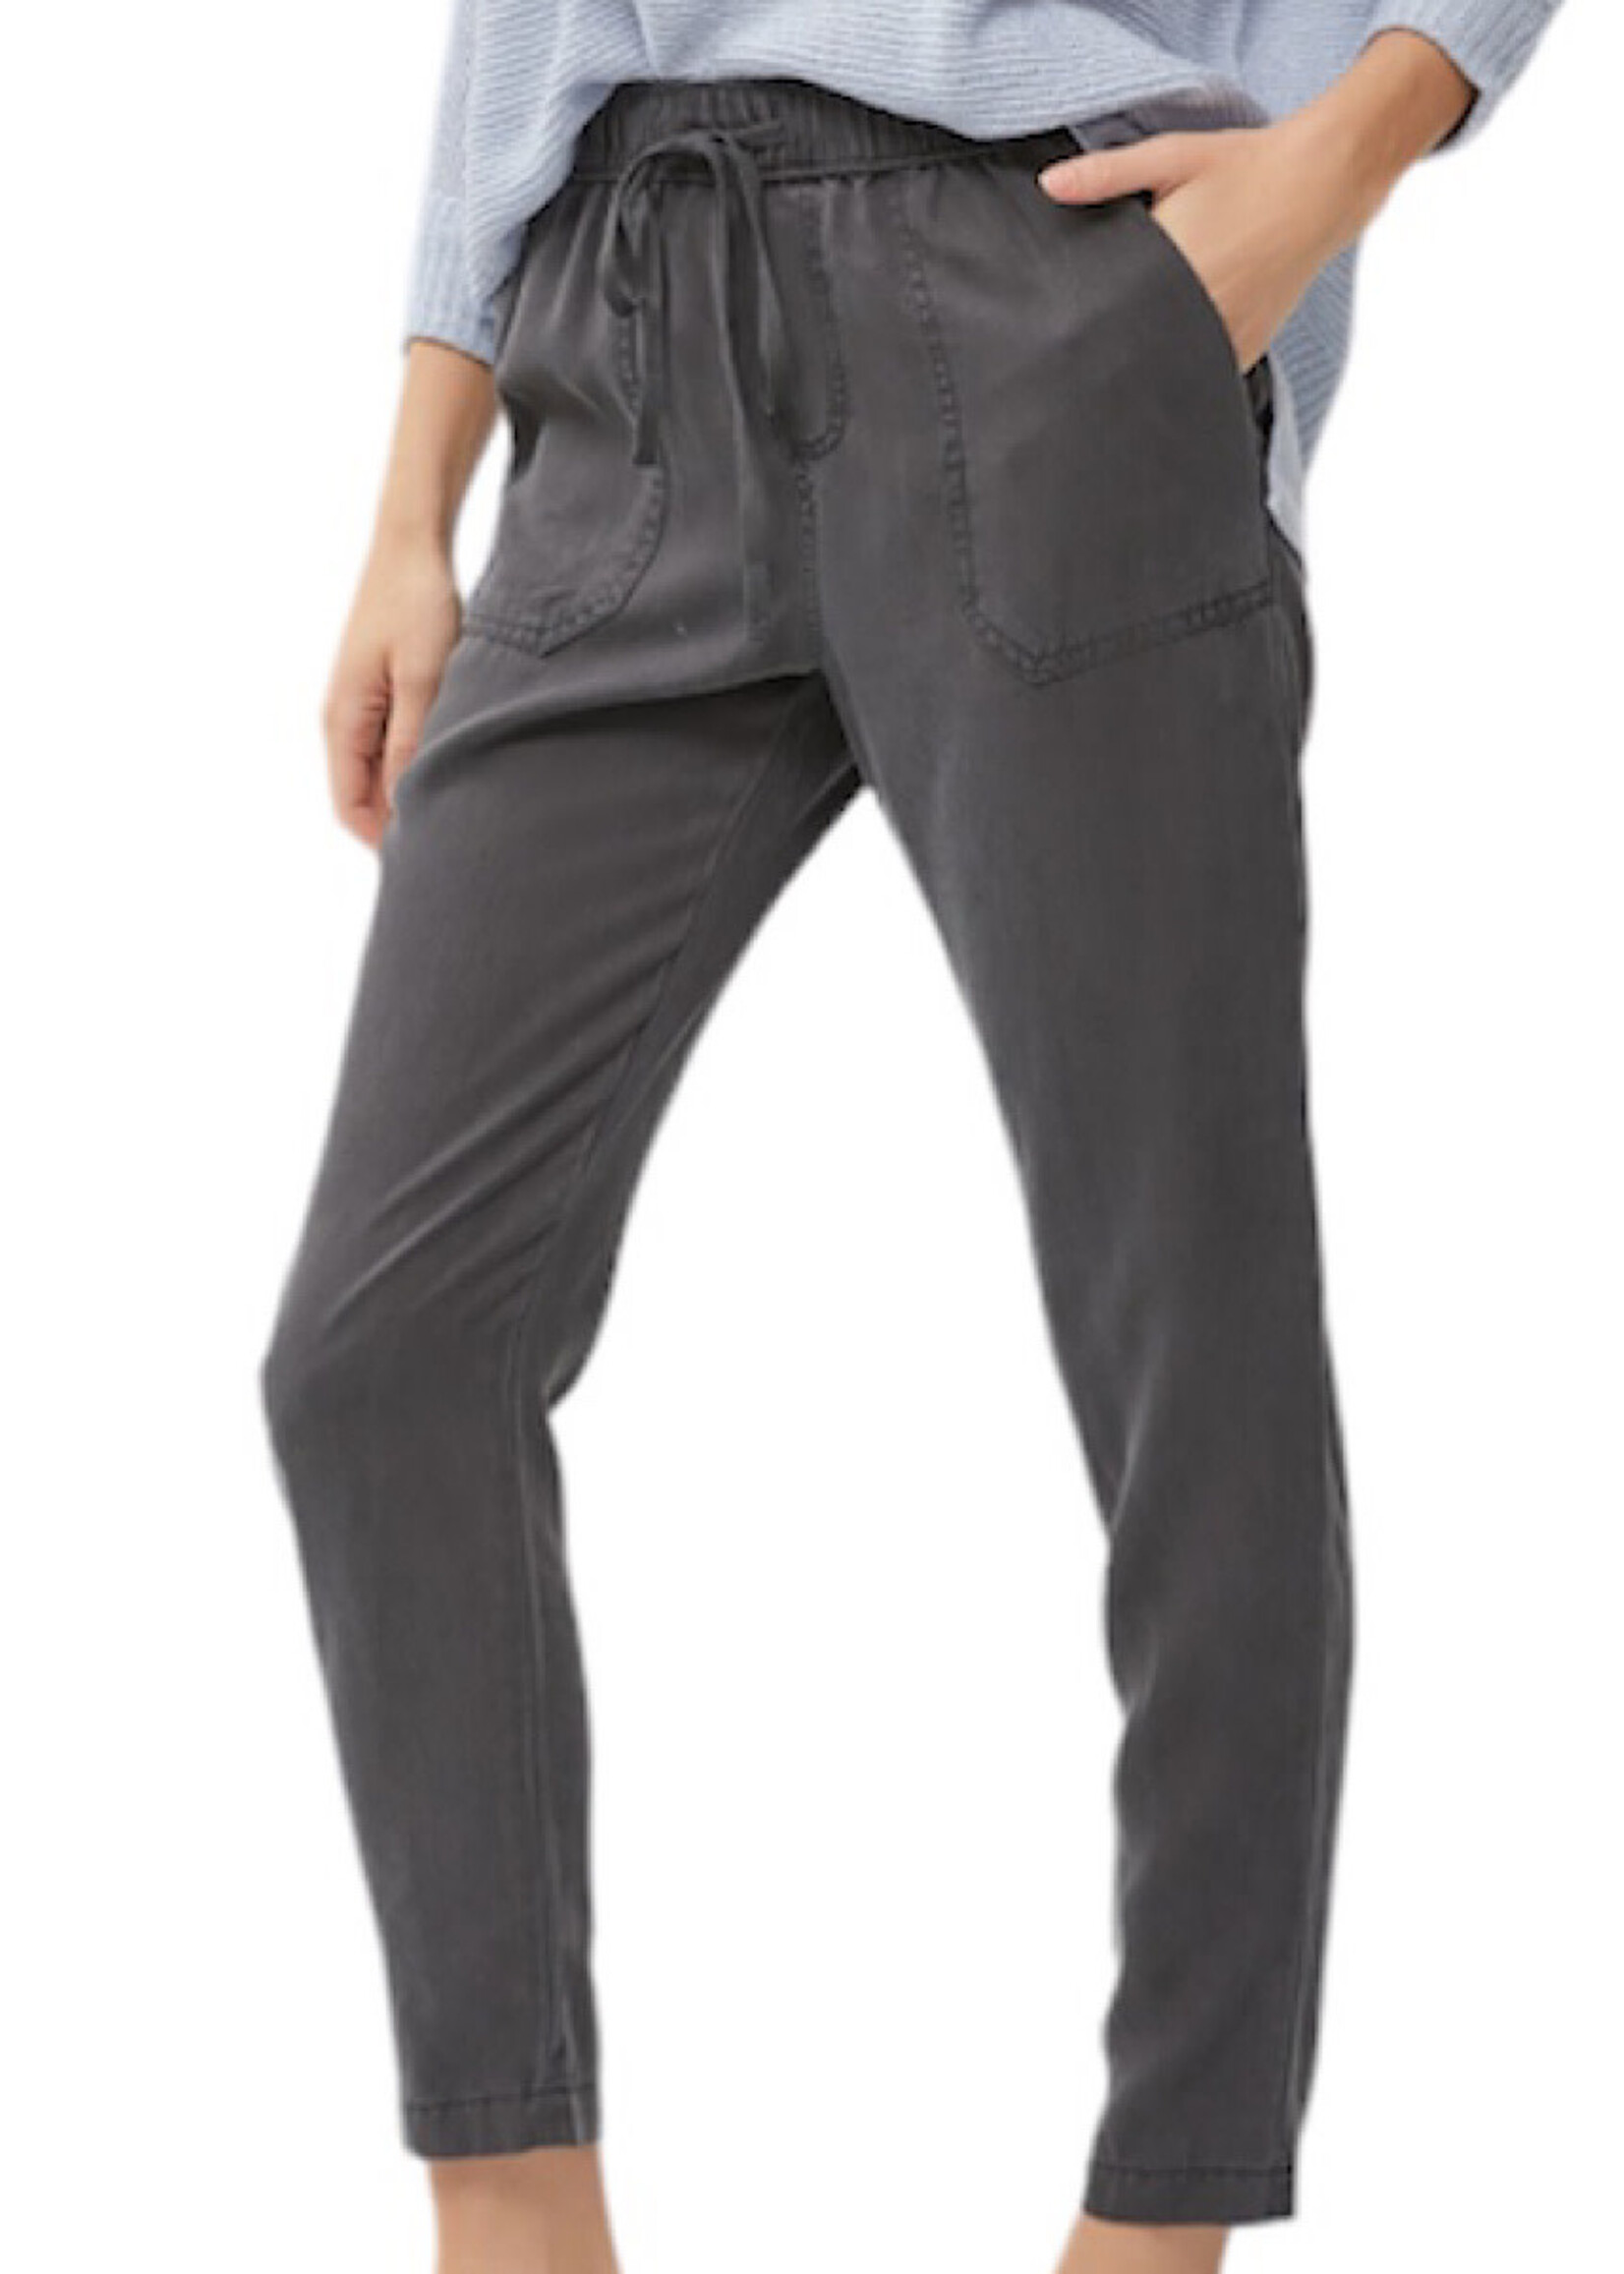 Charcoal Tencel Tapered Pants